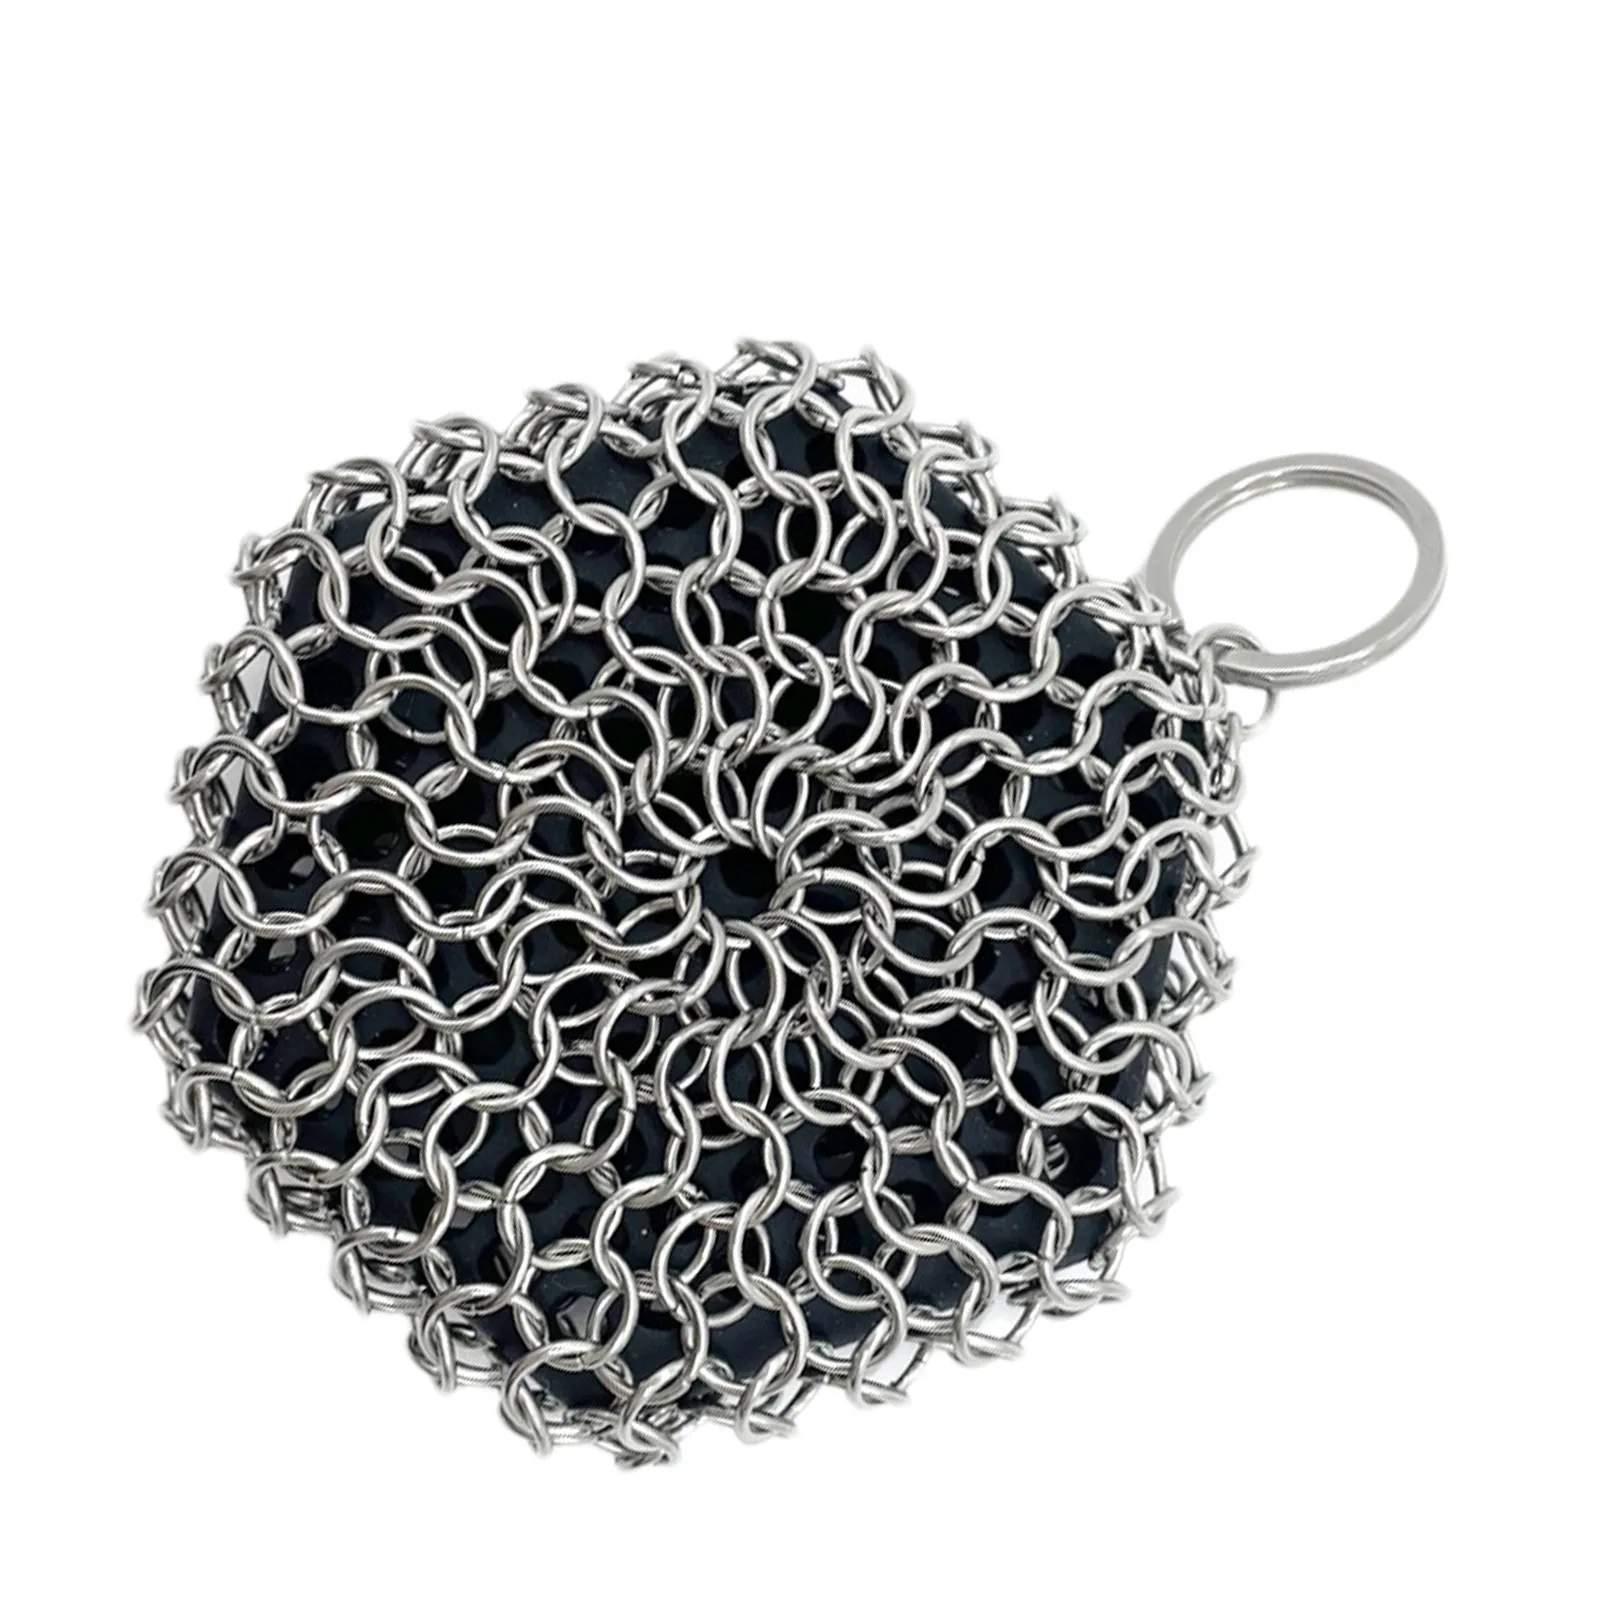 

Stainless Steel Chainmail Scrubber Cast Iron Skillet Cleaner With Silicone Insert Stainless Steel Chain Pot Brush Net For